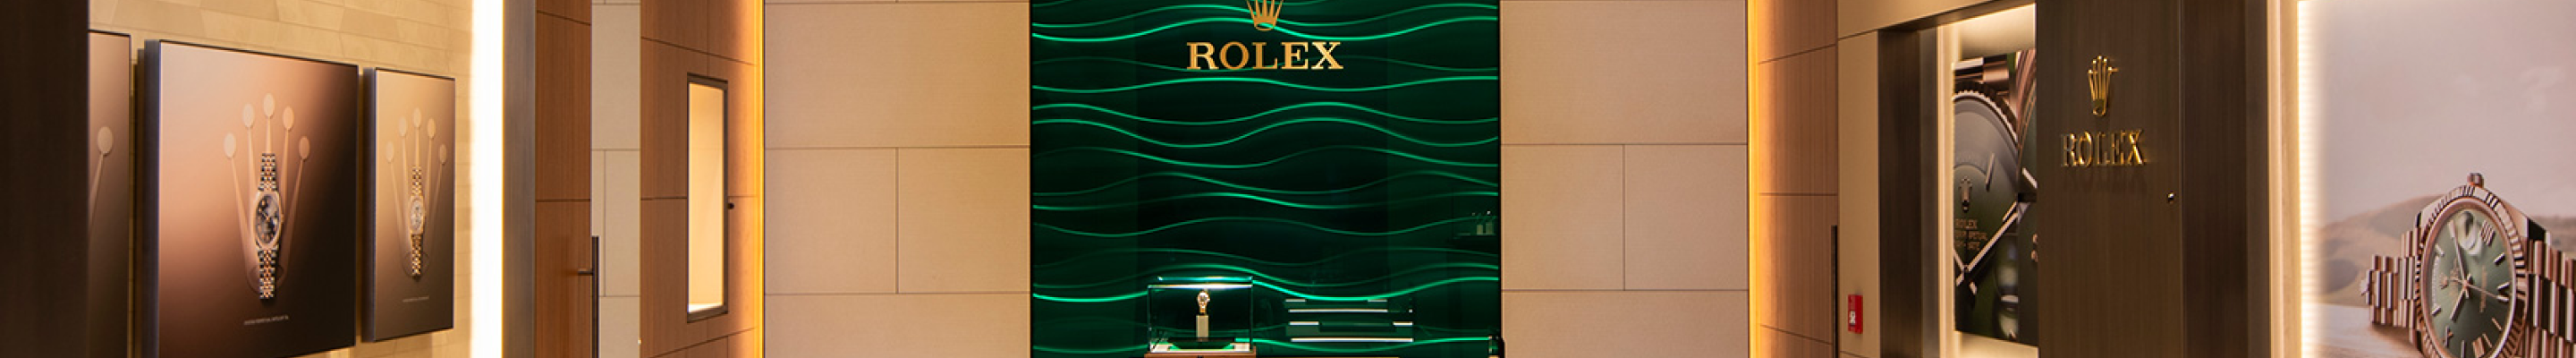 Rolex watches at Humbertown Jewellers in Ontario